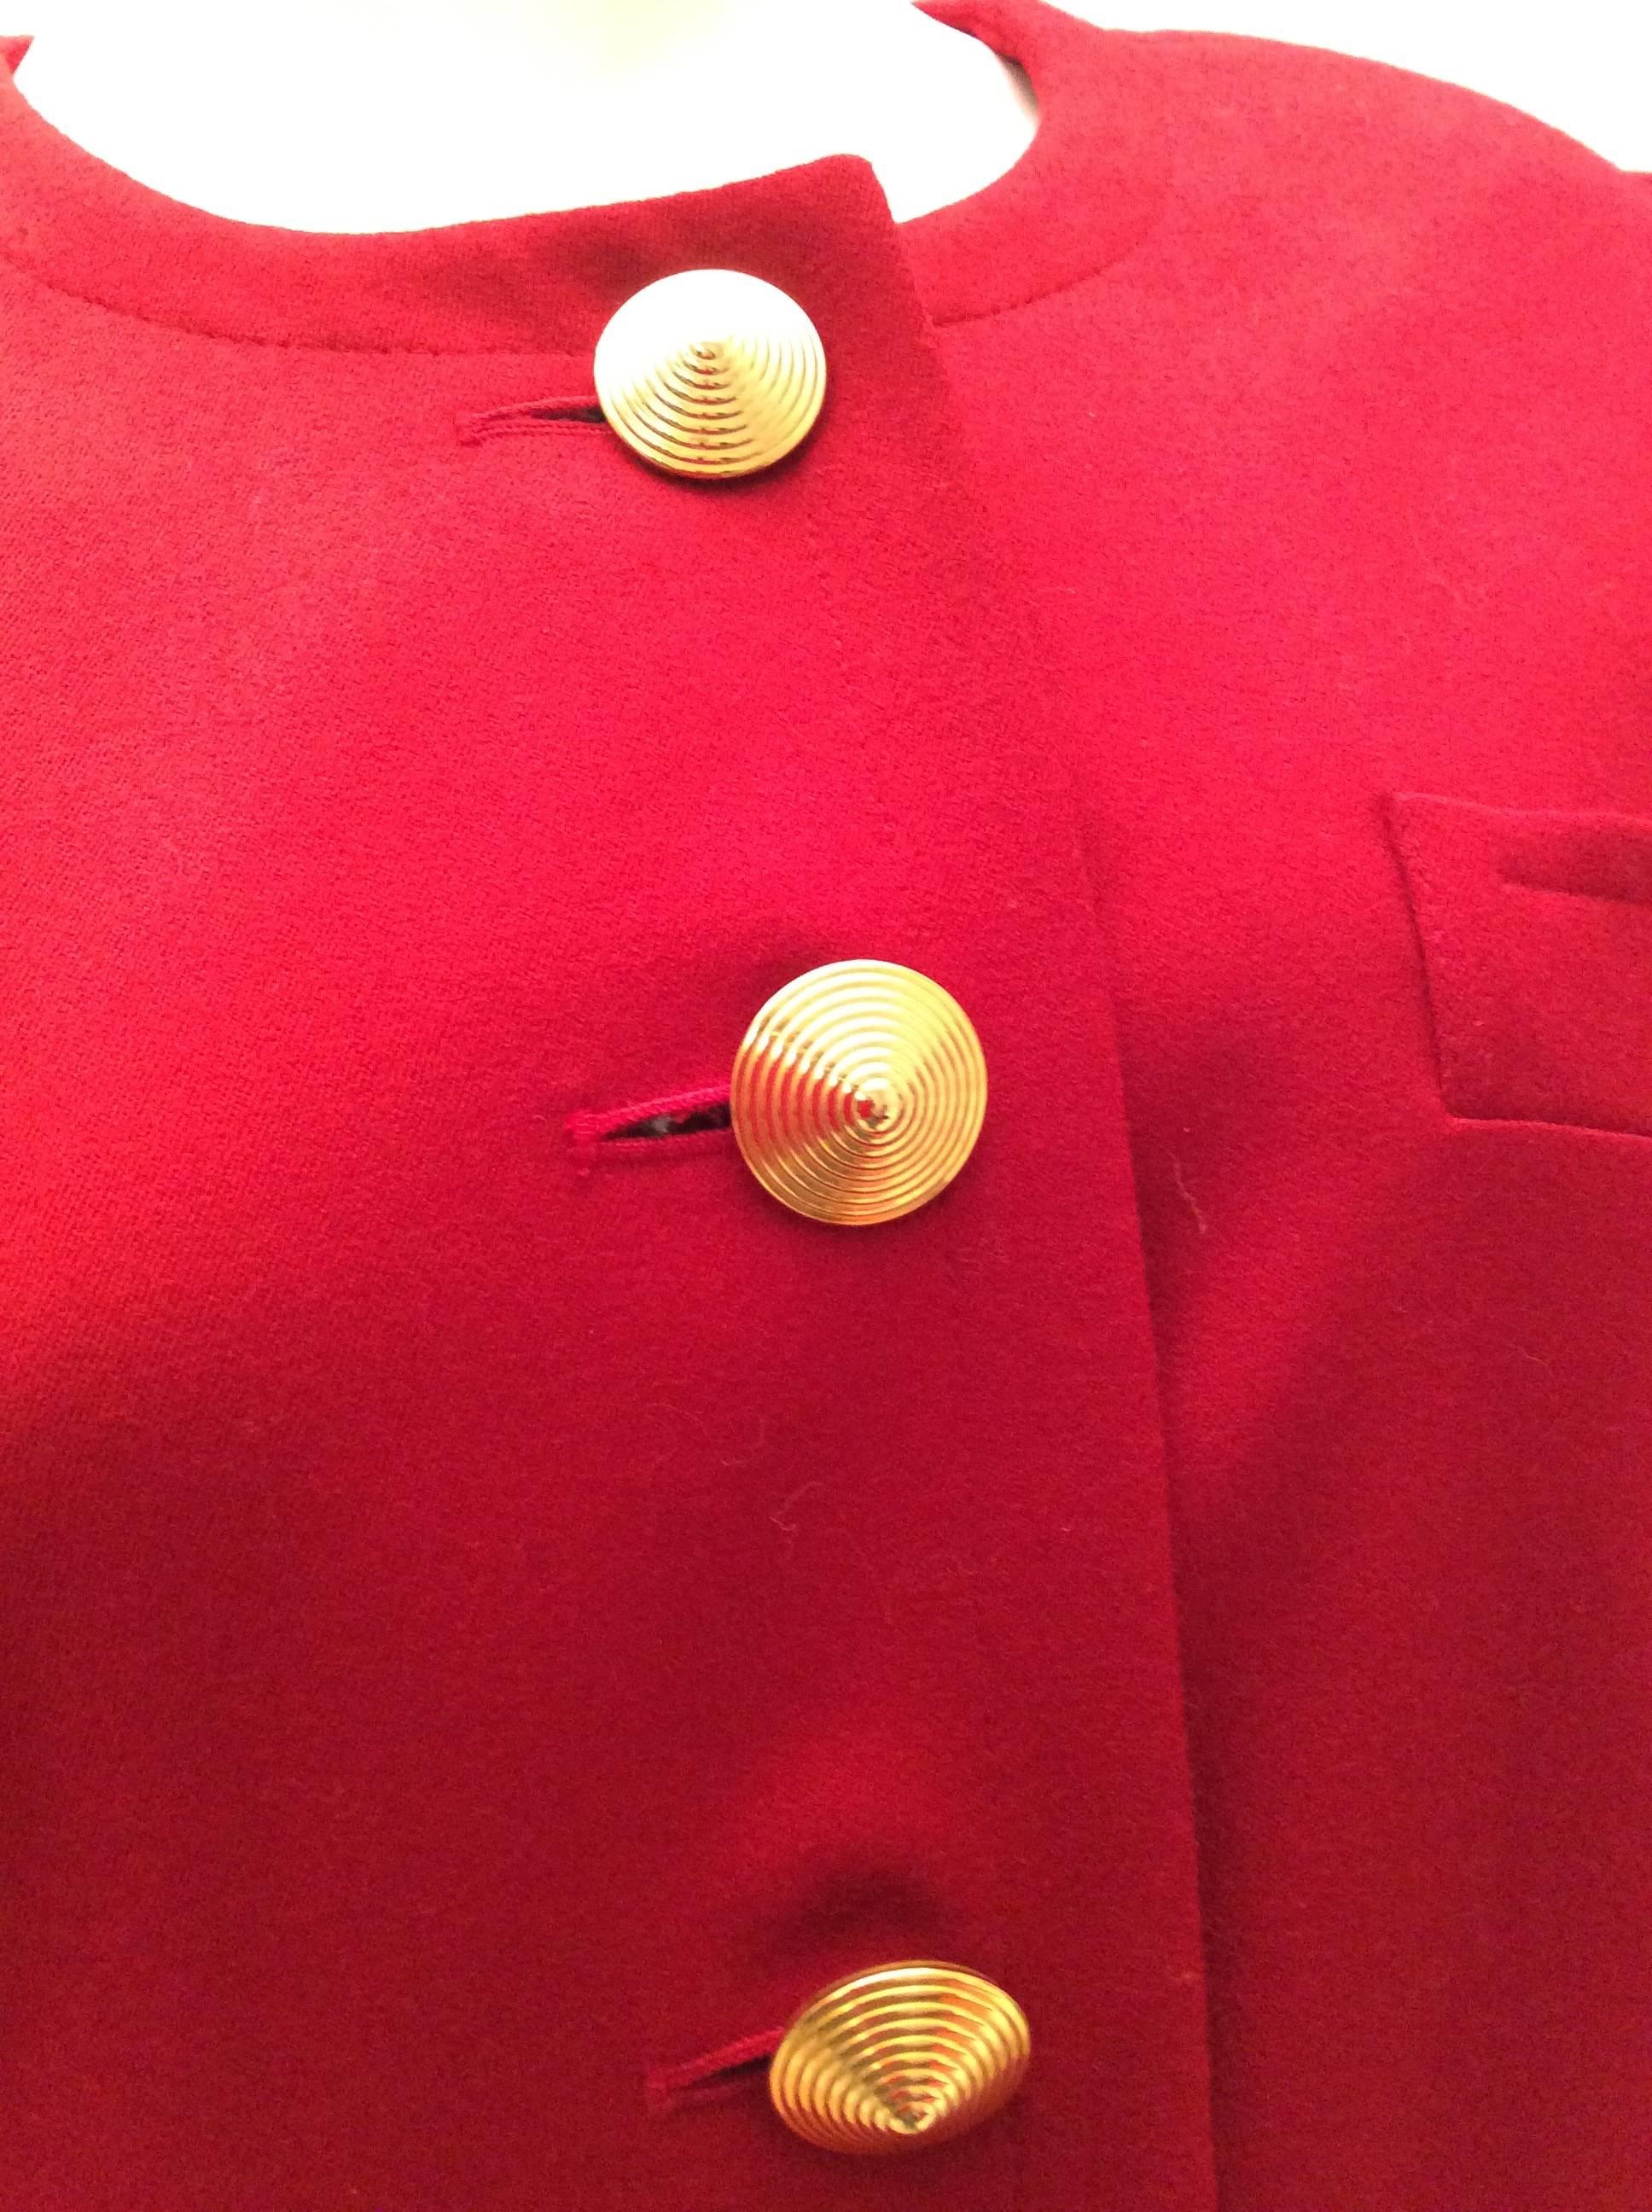 Yves Saint Laurent Red Blazer - Fab Buttons - 1980's For Sale 4